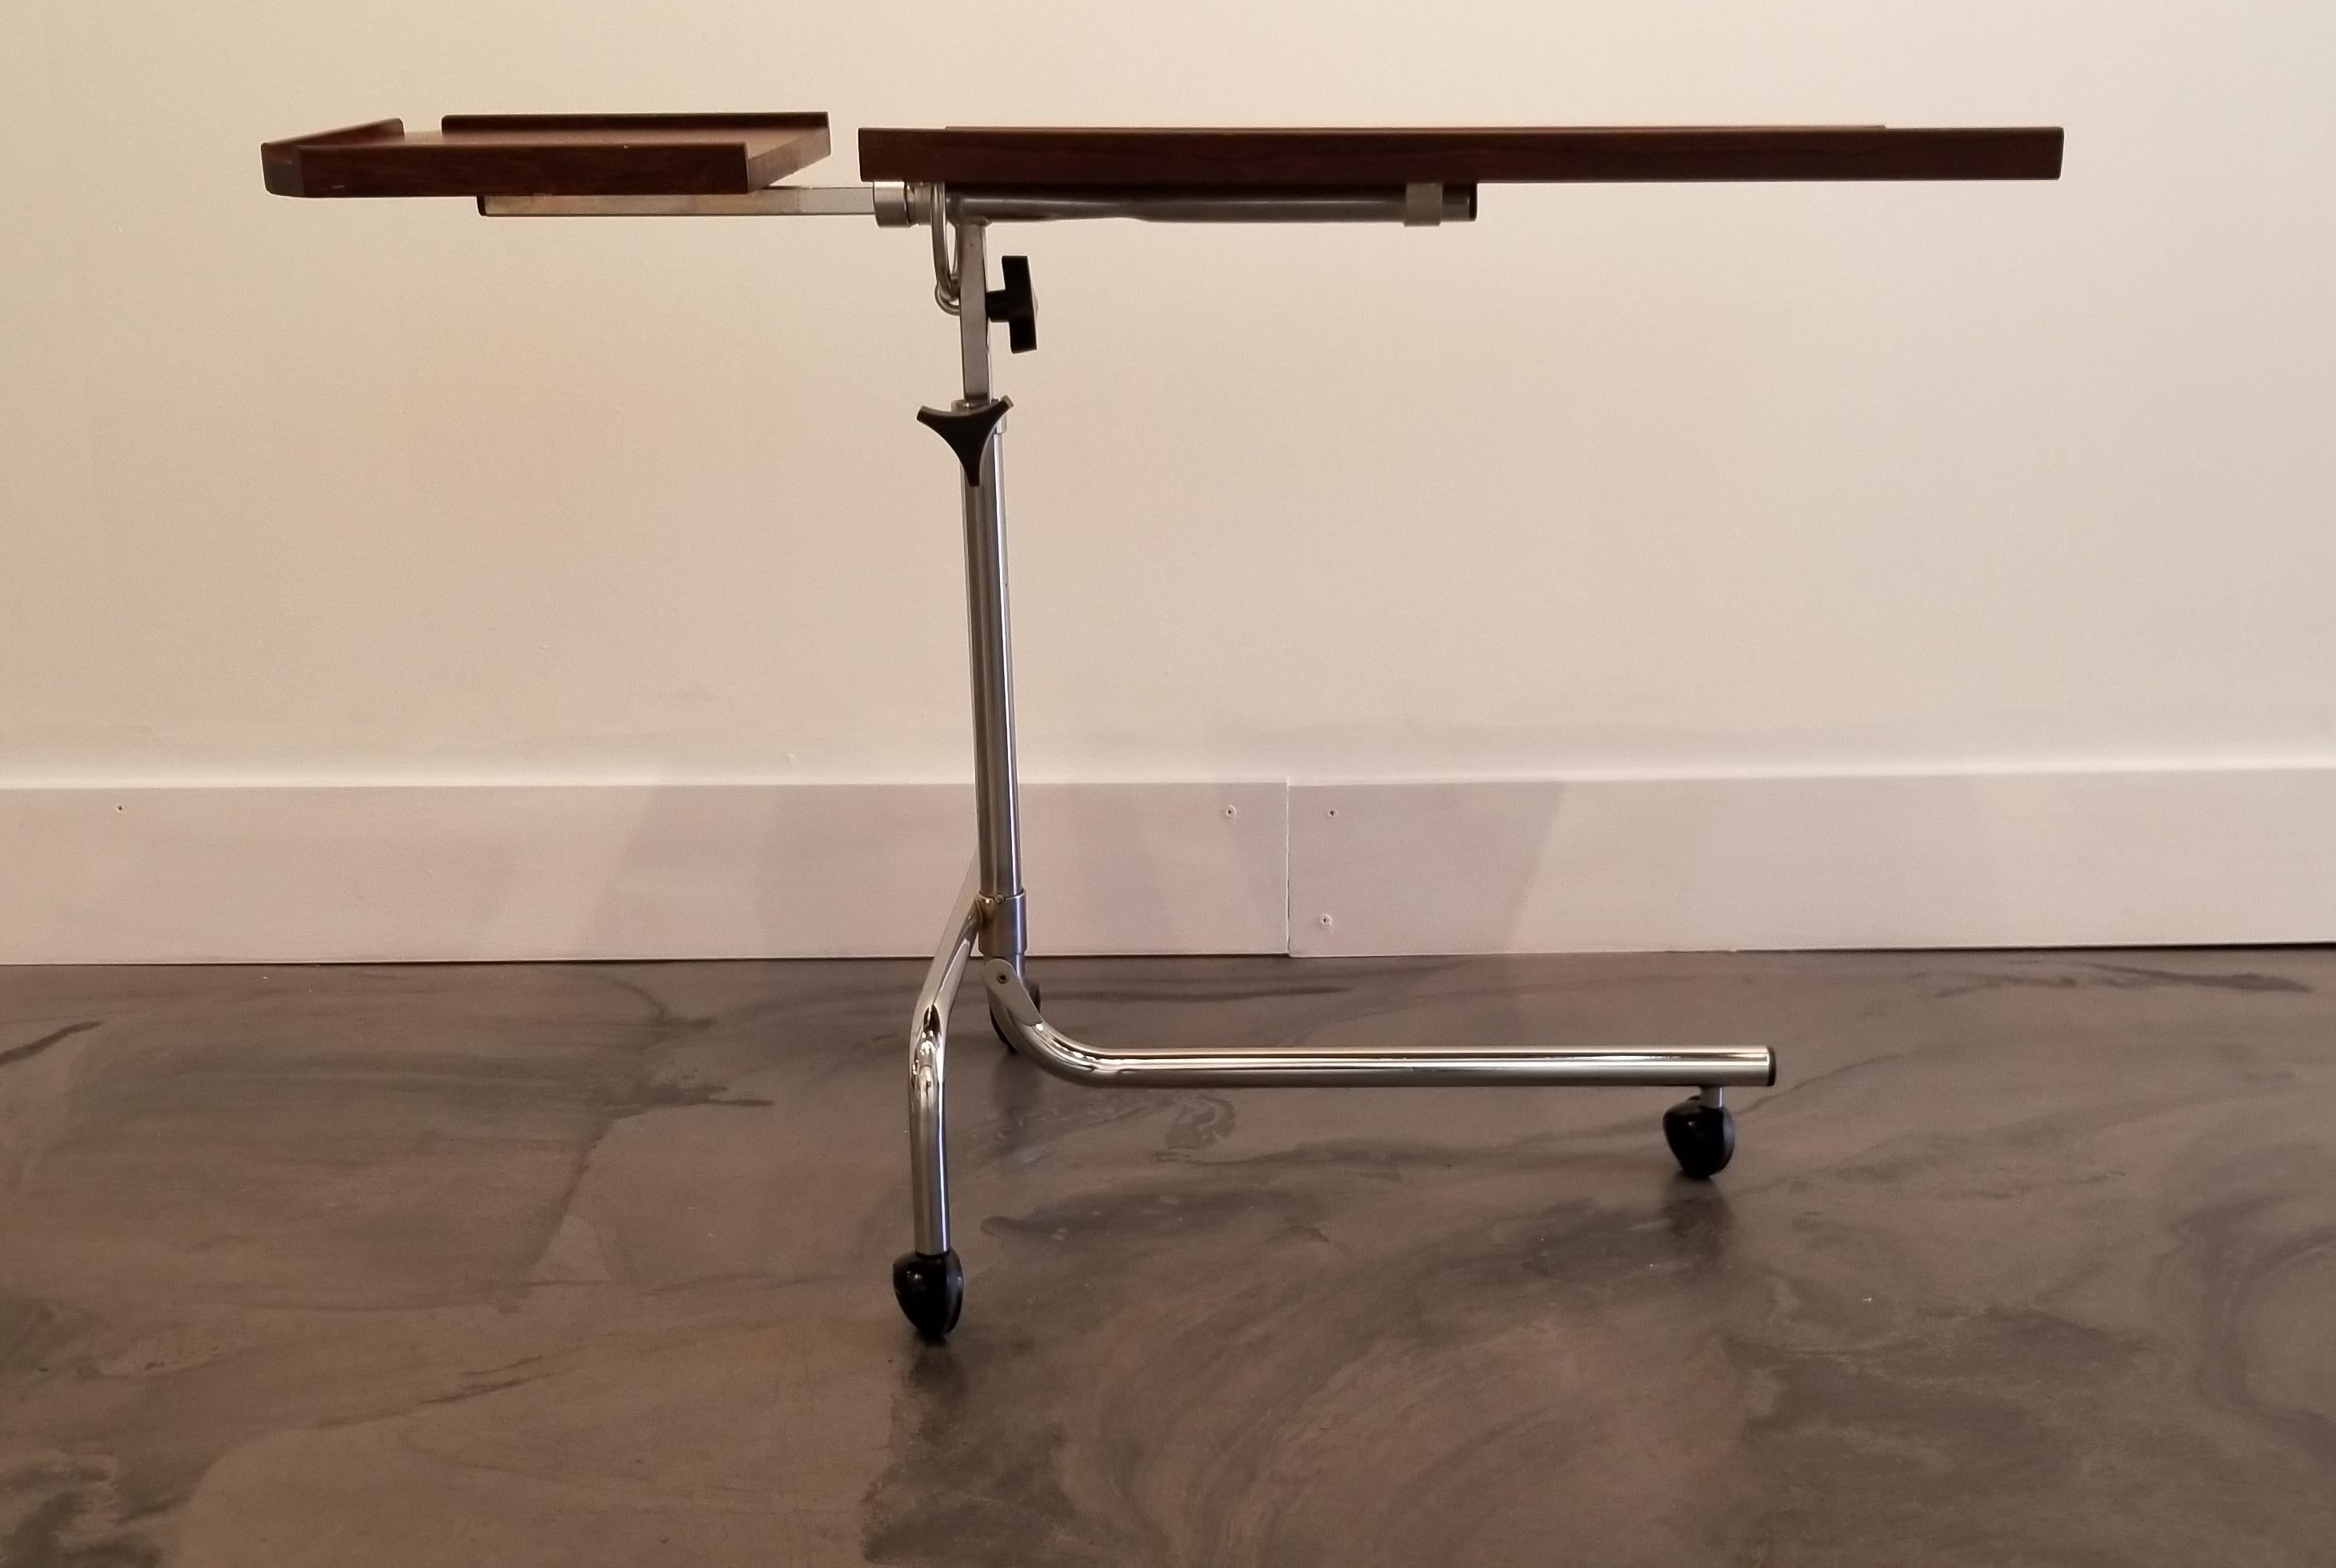 A Danish Modern adjustable table made of rosewood and polished chrome. Top tilts 90 degrees and has height adjustment from 25 inches to 34 inches in height. Will make a nice bedside, end table, TV table or work table. Small side table is removable.